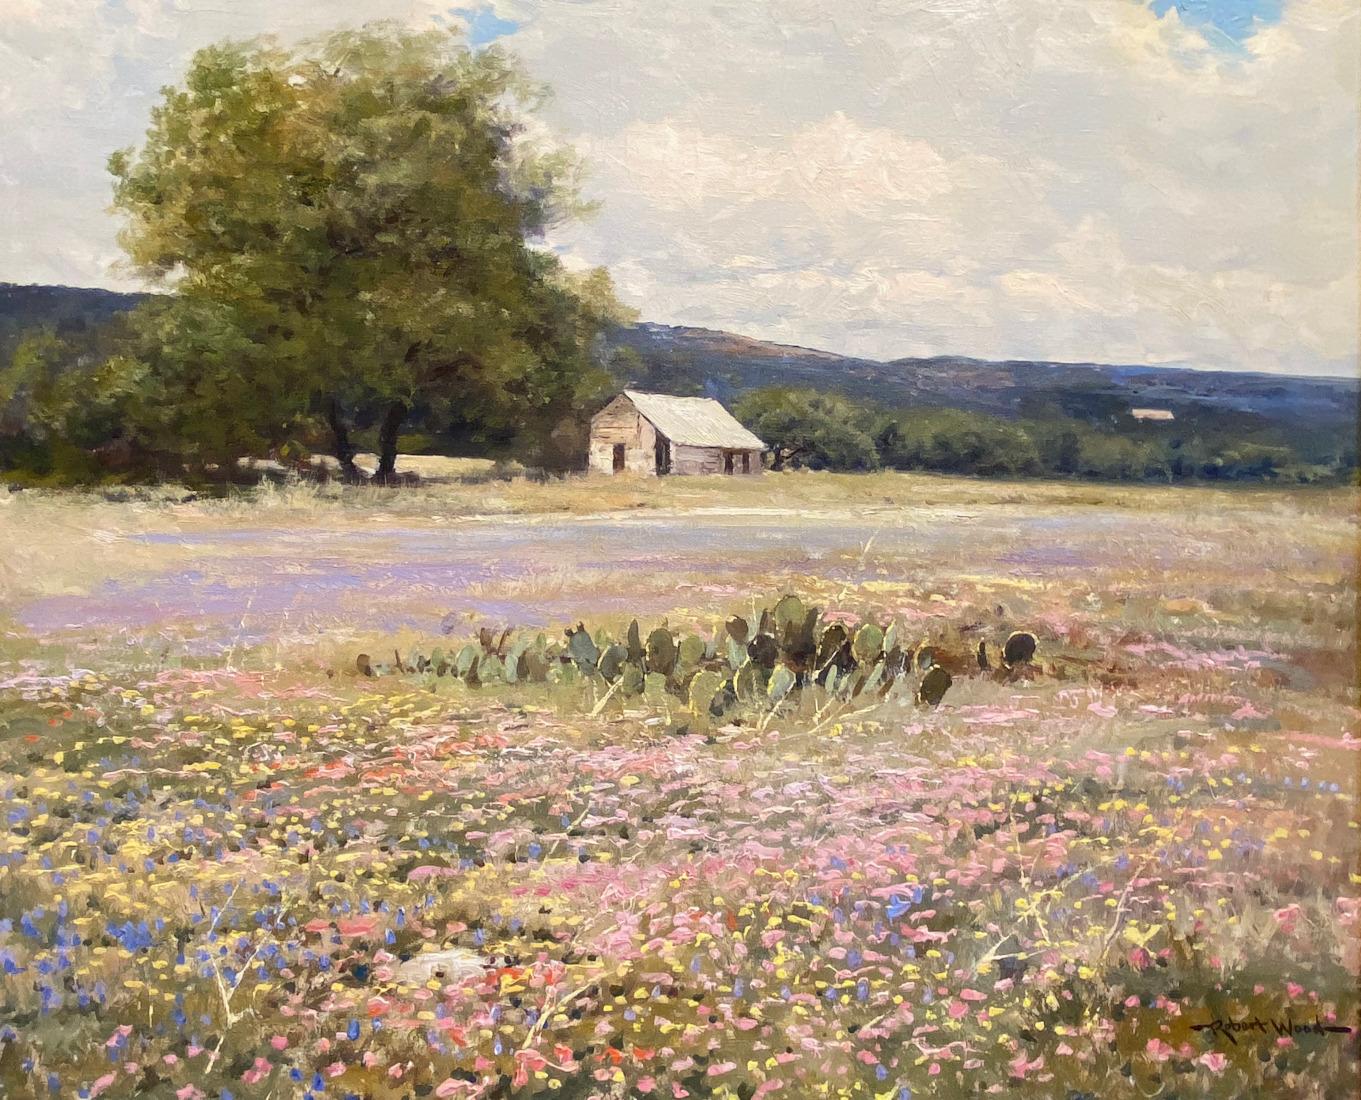 Robert William Wood Landscape Painting - "SPRING MIX" TEXAS HILL COUNTRY WILDFLOWERS IMAGE: 25 X 30